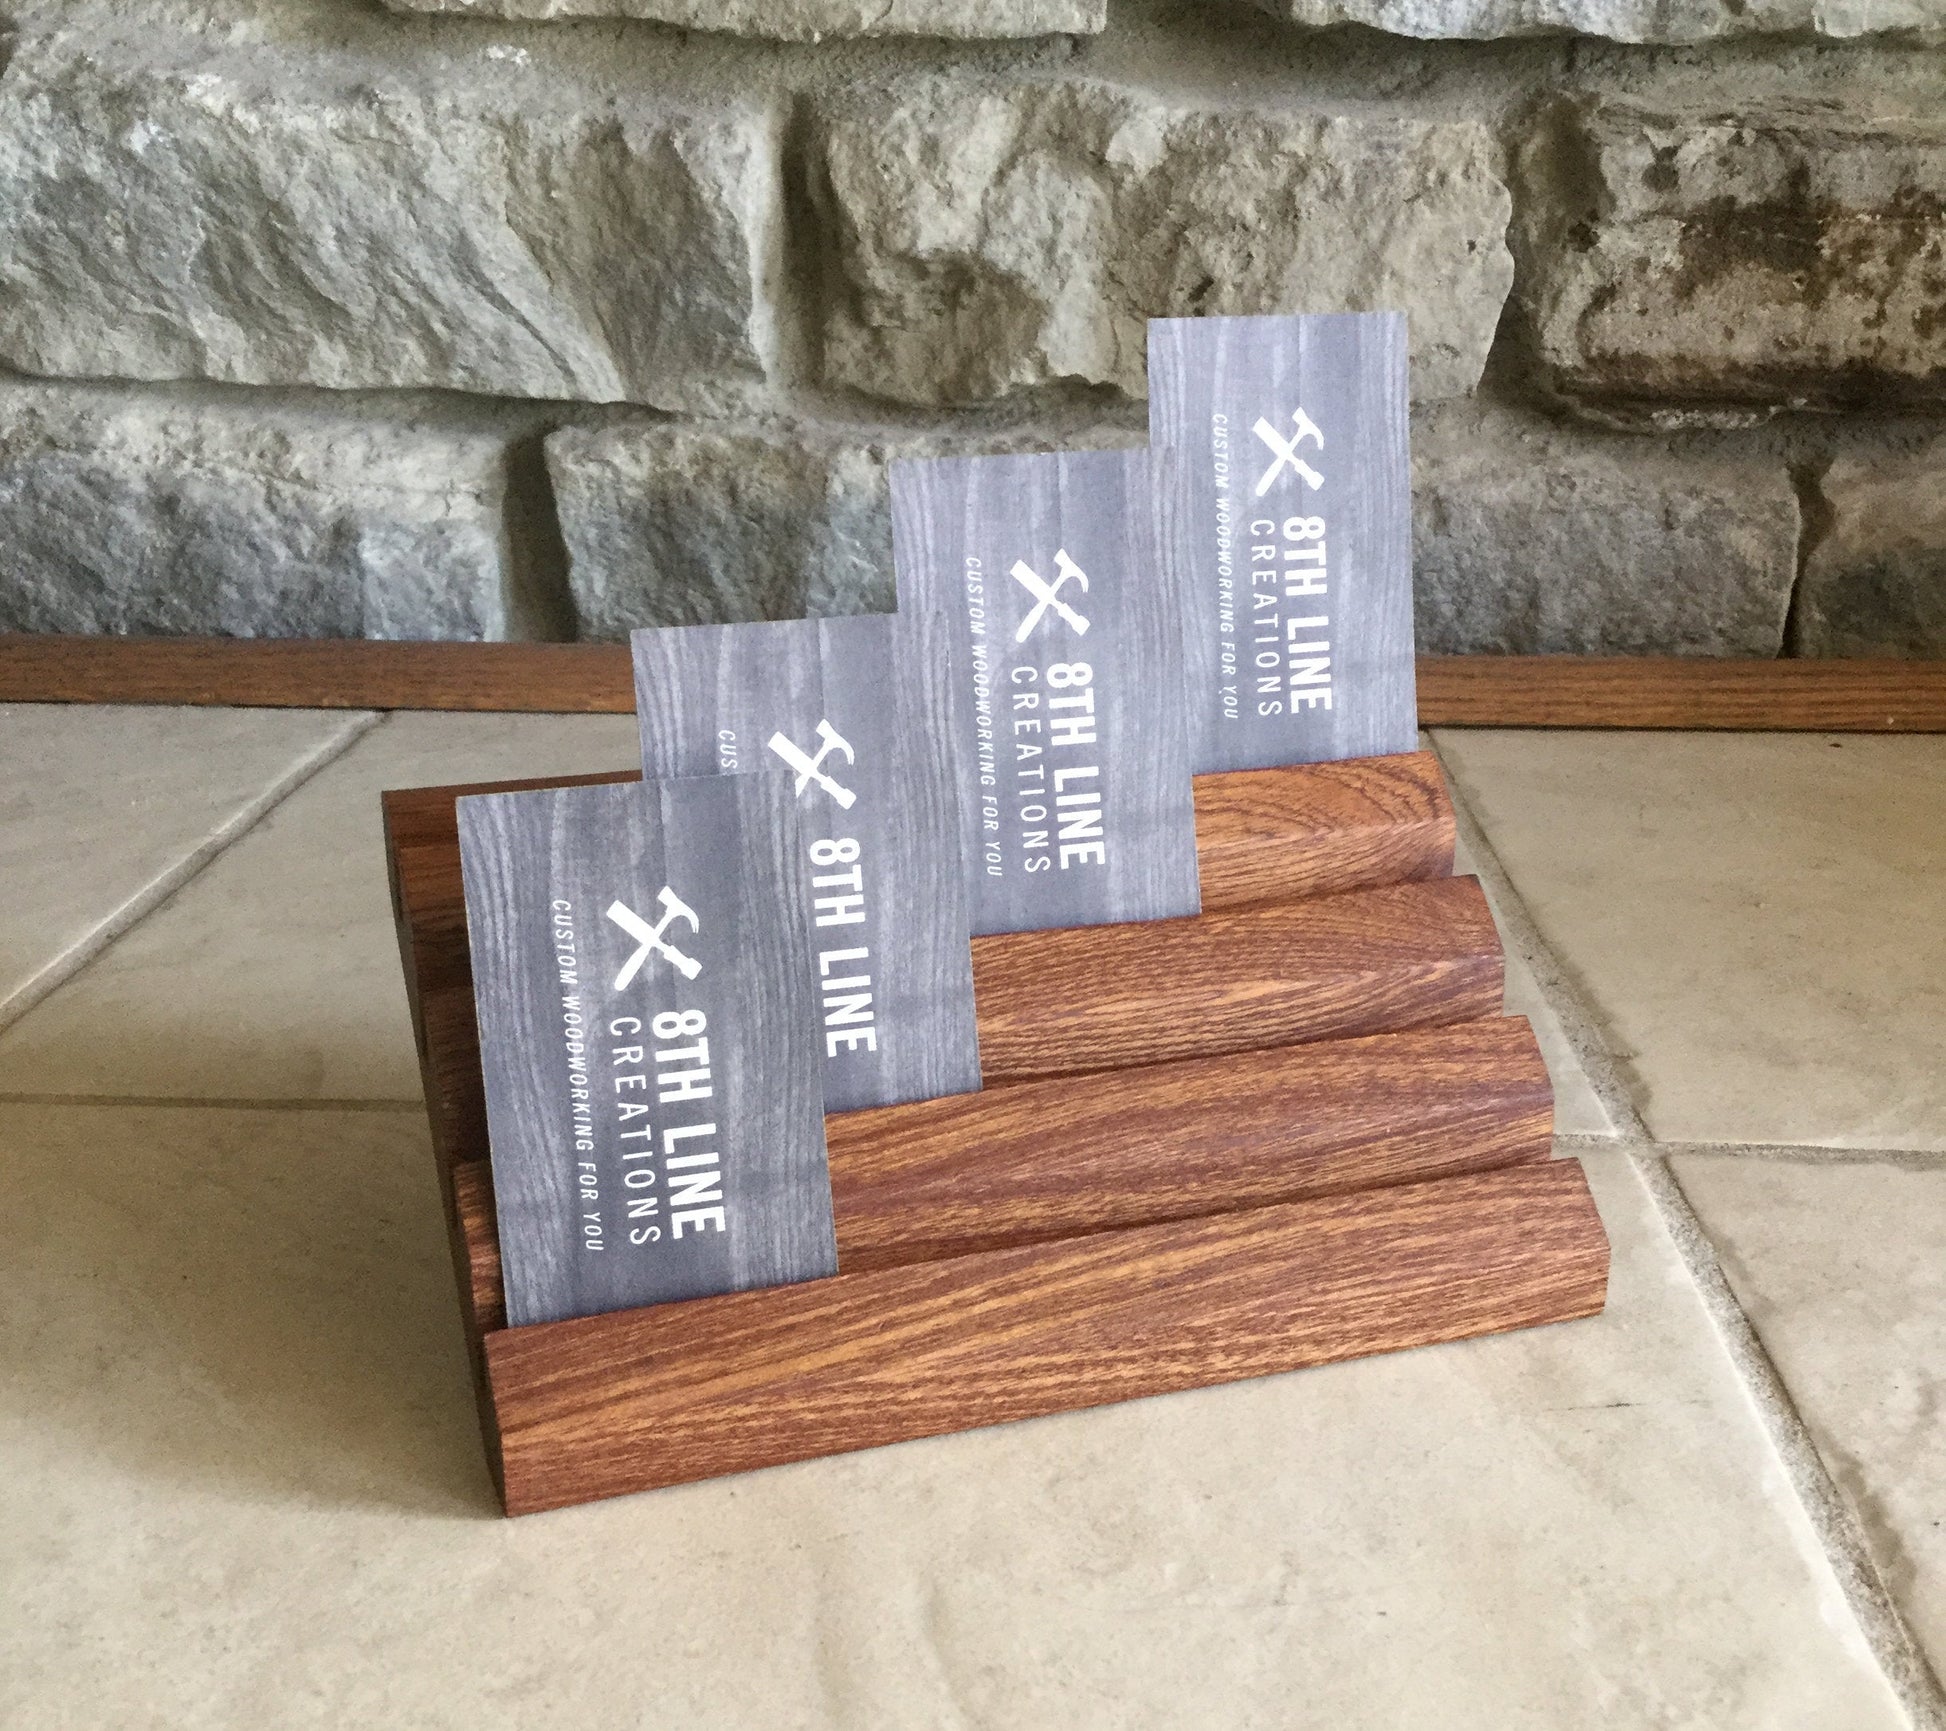 8 Card Business Card Holder - Made from Sapele (Mahogany) Business Card Holders 8th Line Creations 